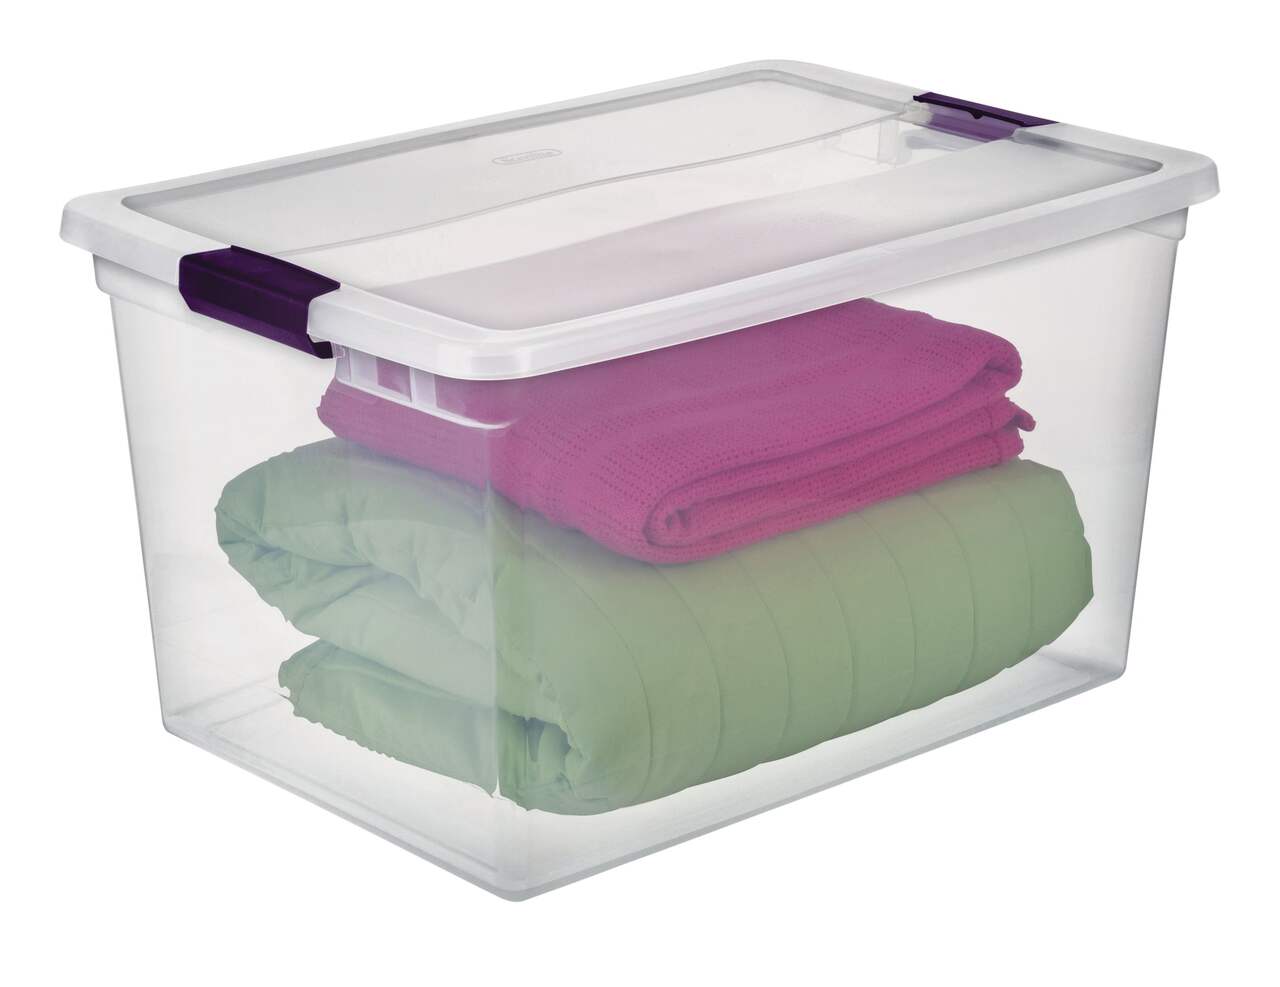 https://media-www.canadiantire.ca/product/living/home-organization/storage-solutions/1426025/sterilite-clearview-tote-with-latch-62l-91384412-aaef-4b05-b9a4-6dba5980bbab-jpgrendition.jpg?imdensity=1&imwidth=640&impolicy=mZoom